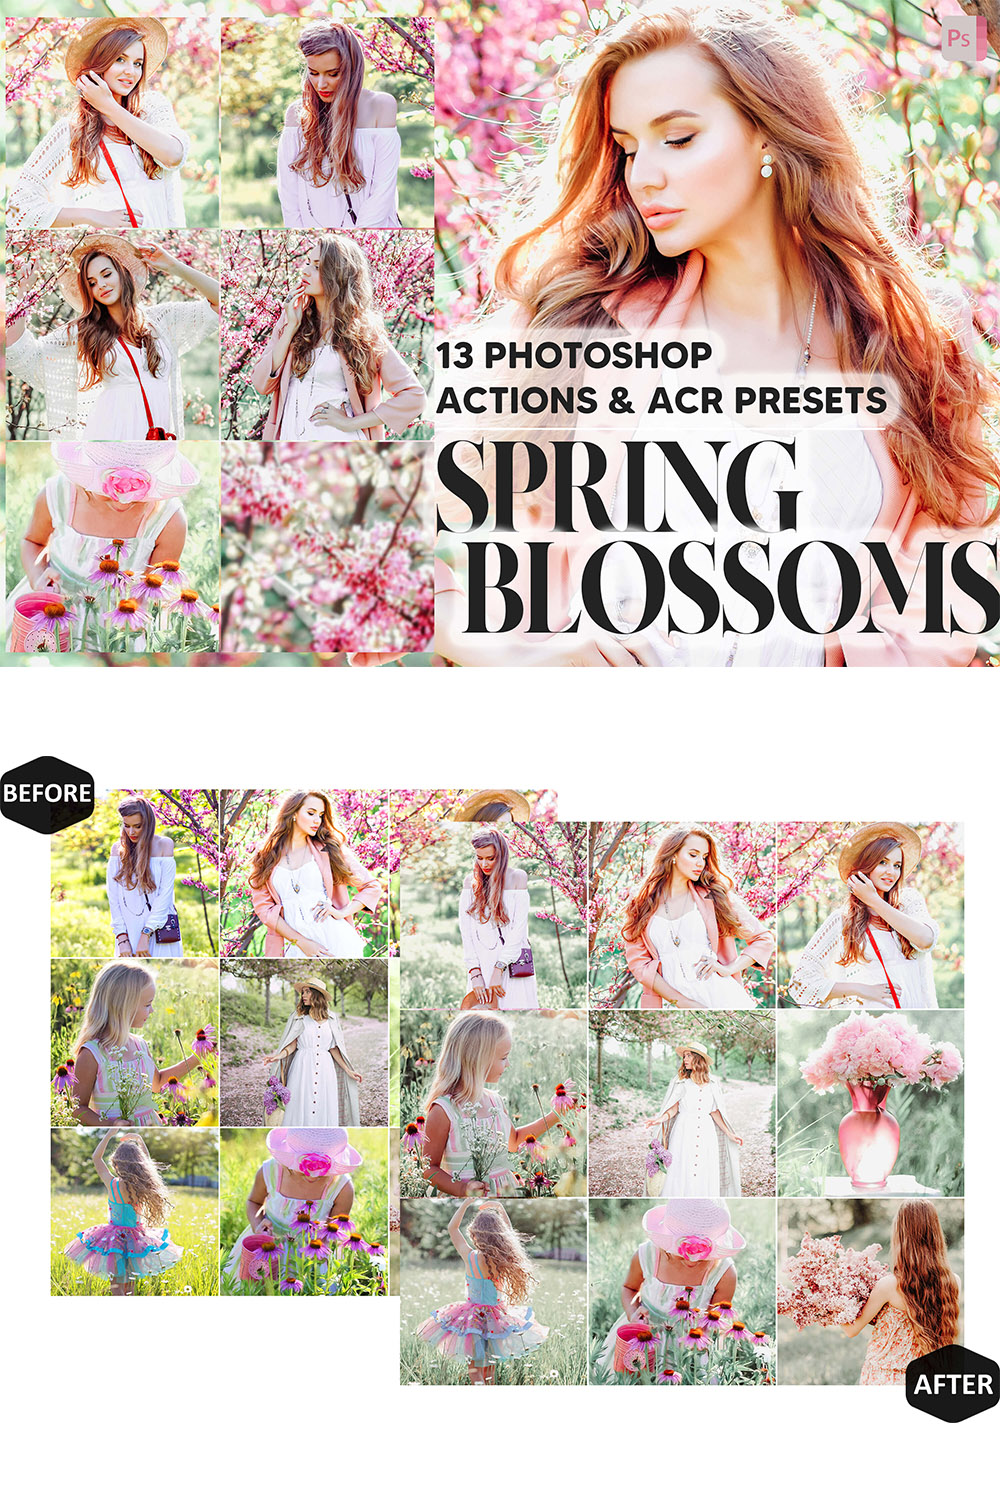 13 Photoshop Actions, Spring Blossoms Ps Action, Pastel Pink ACR Preset, Bright Ps Filter, Atn Portrait Lifestyle Theme Instagram, Blogger pinterest preview image.